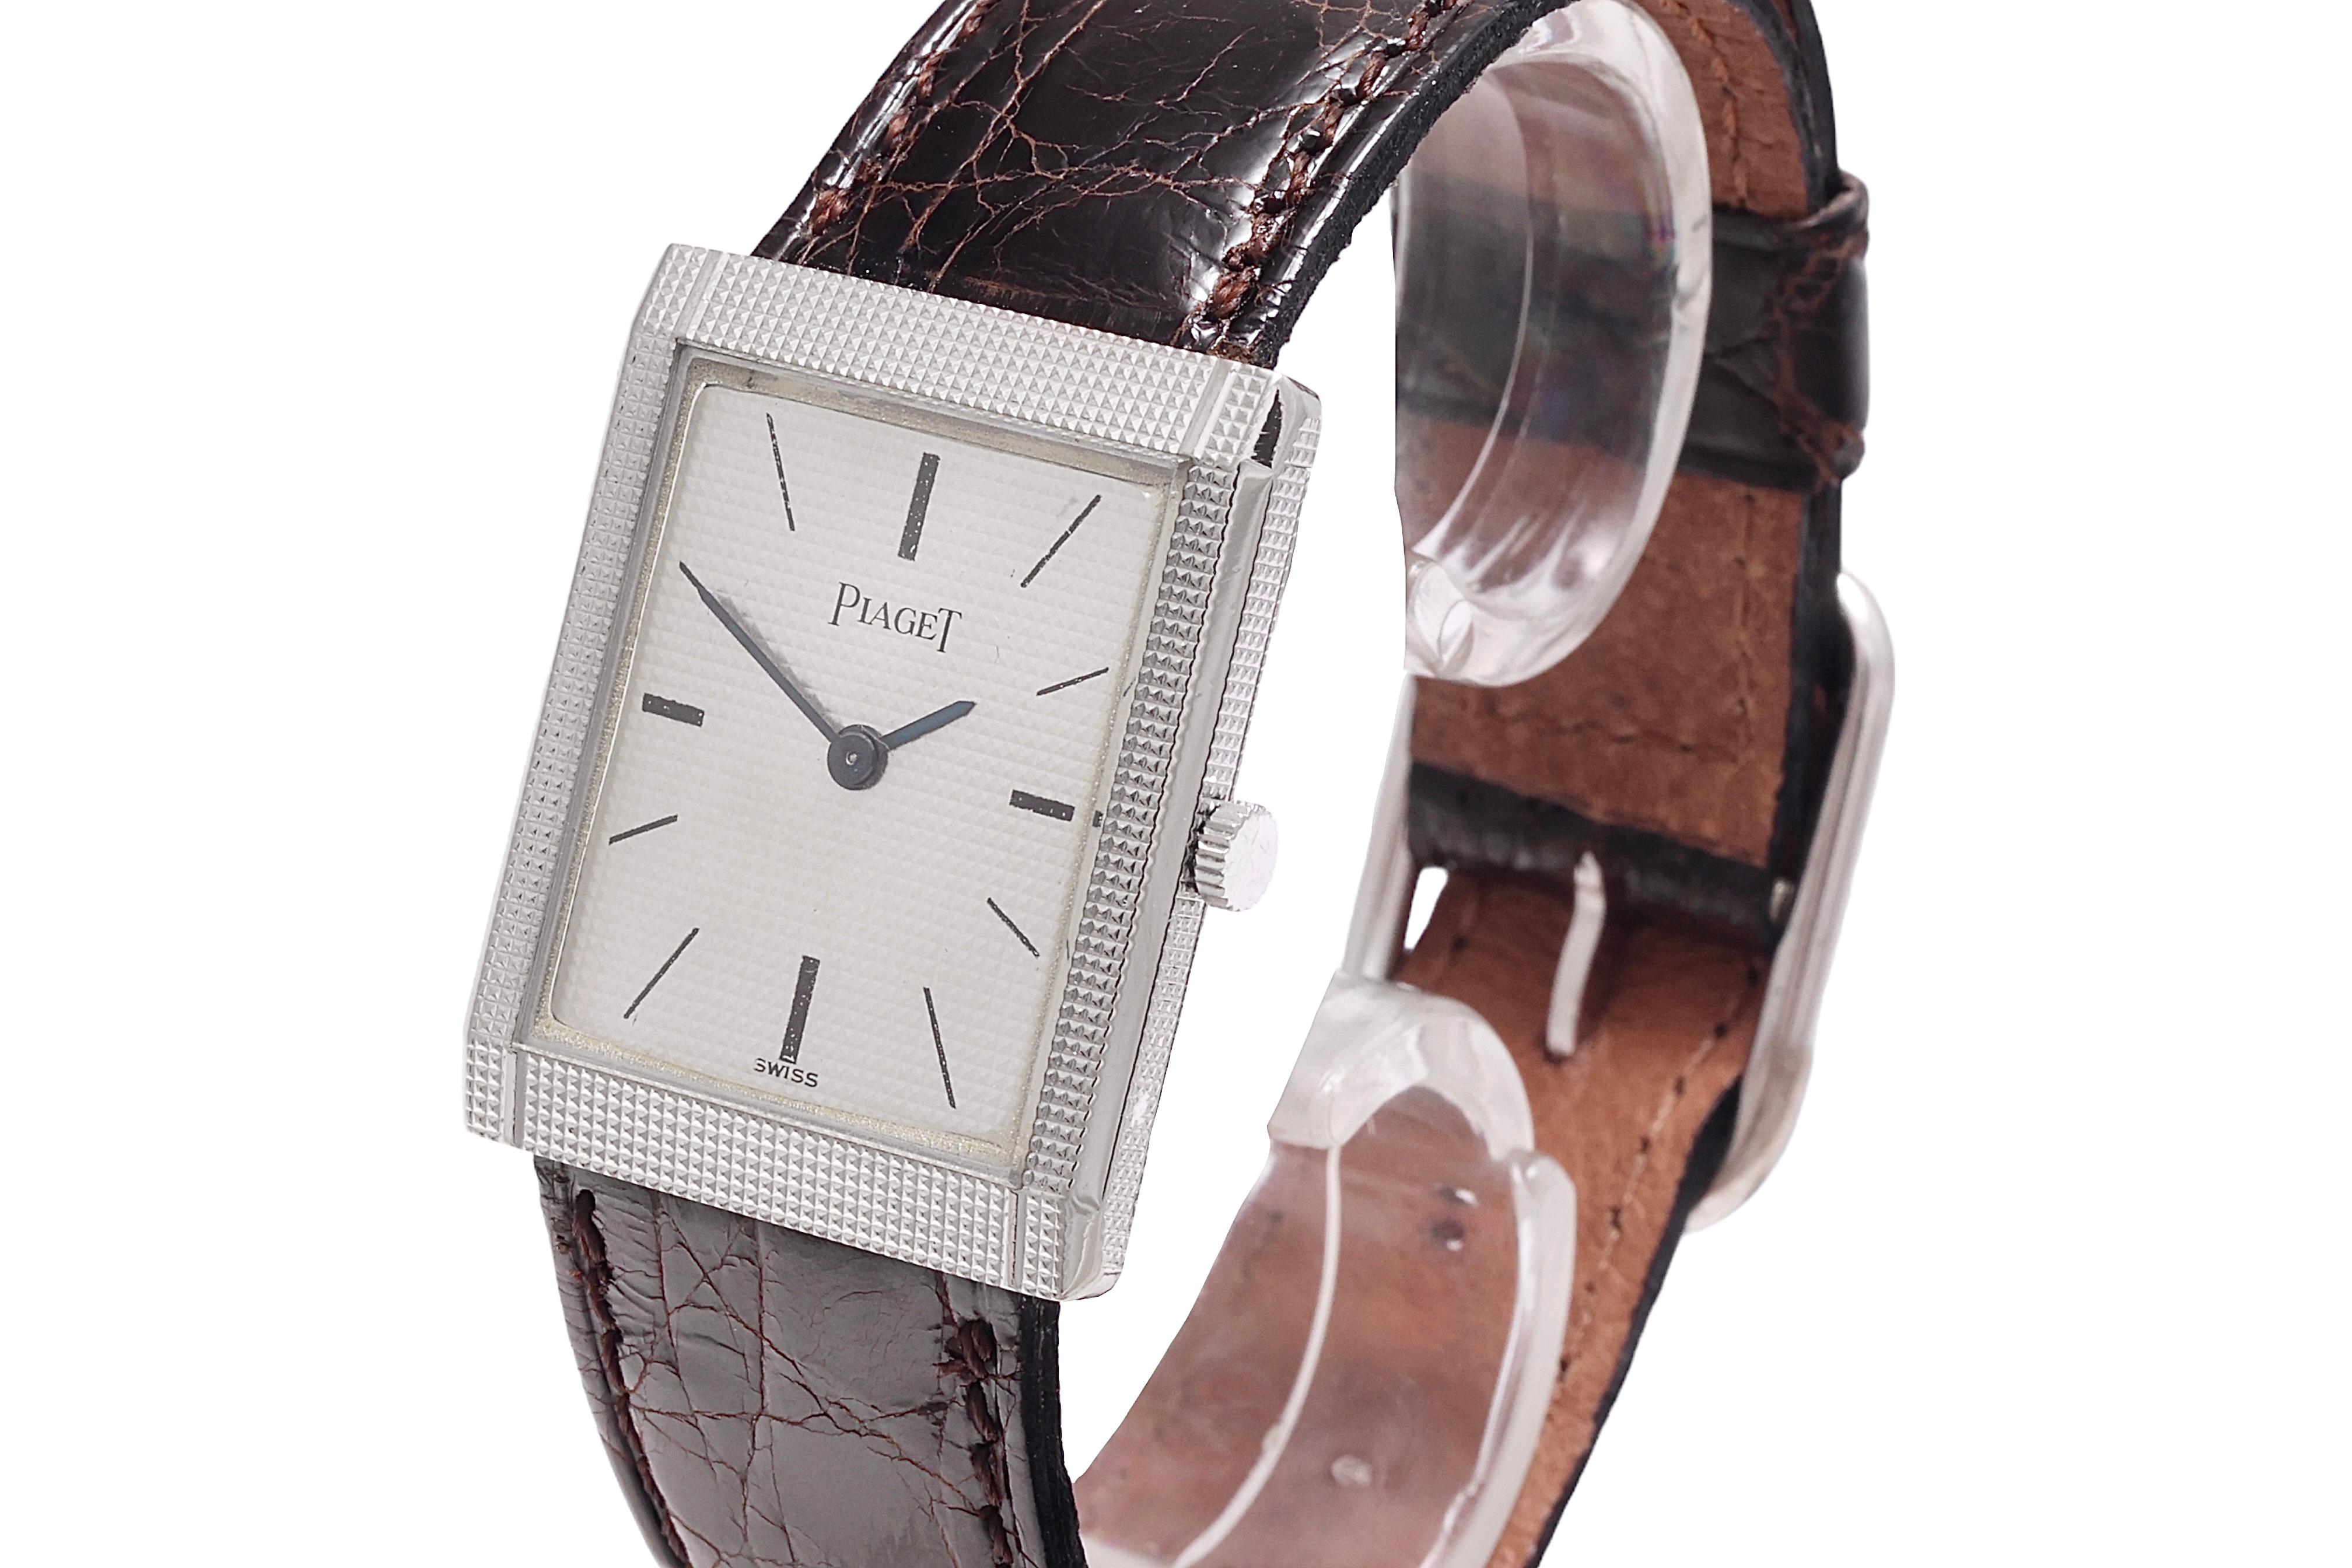 Artisan 18 kt. White Gold Piaget Wrist Watch, Manual Winding Ultra Thin, Collectors For Sale